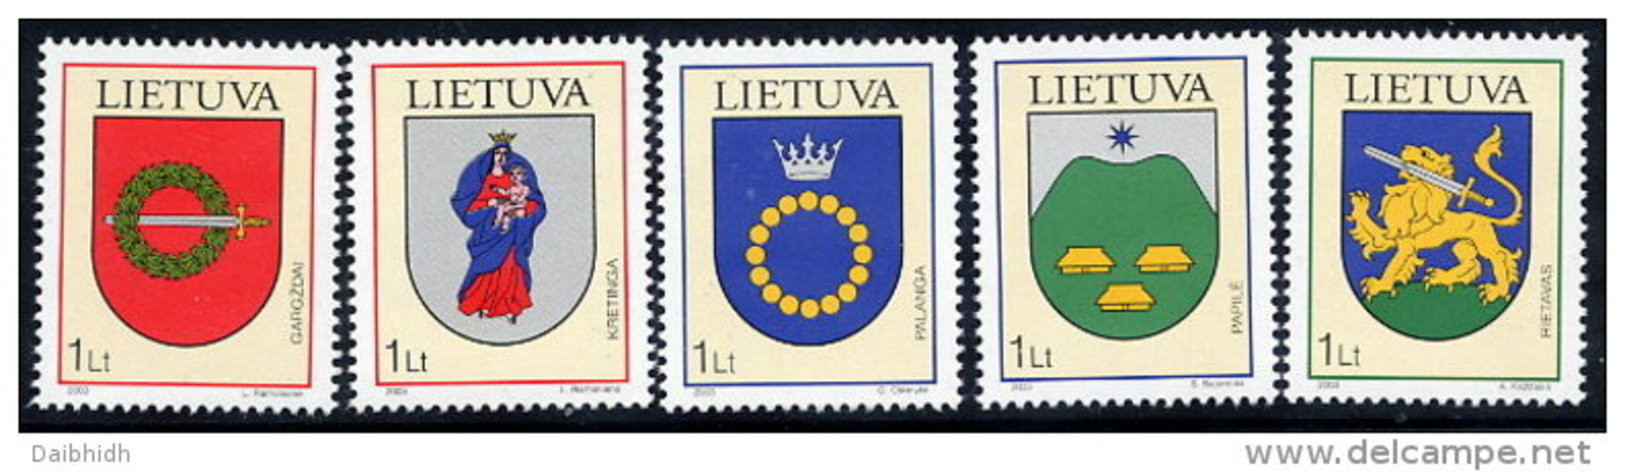 LITHUANIA 2003  Town Arms Set Of 5 MNH / **.  Michel 809-13 - Lithuania